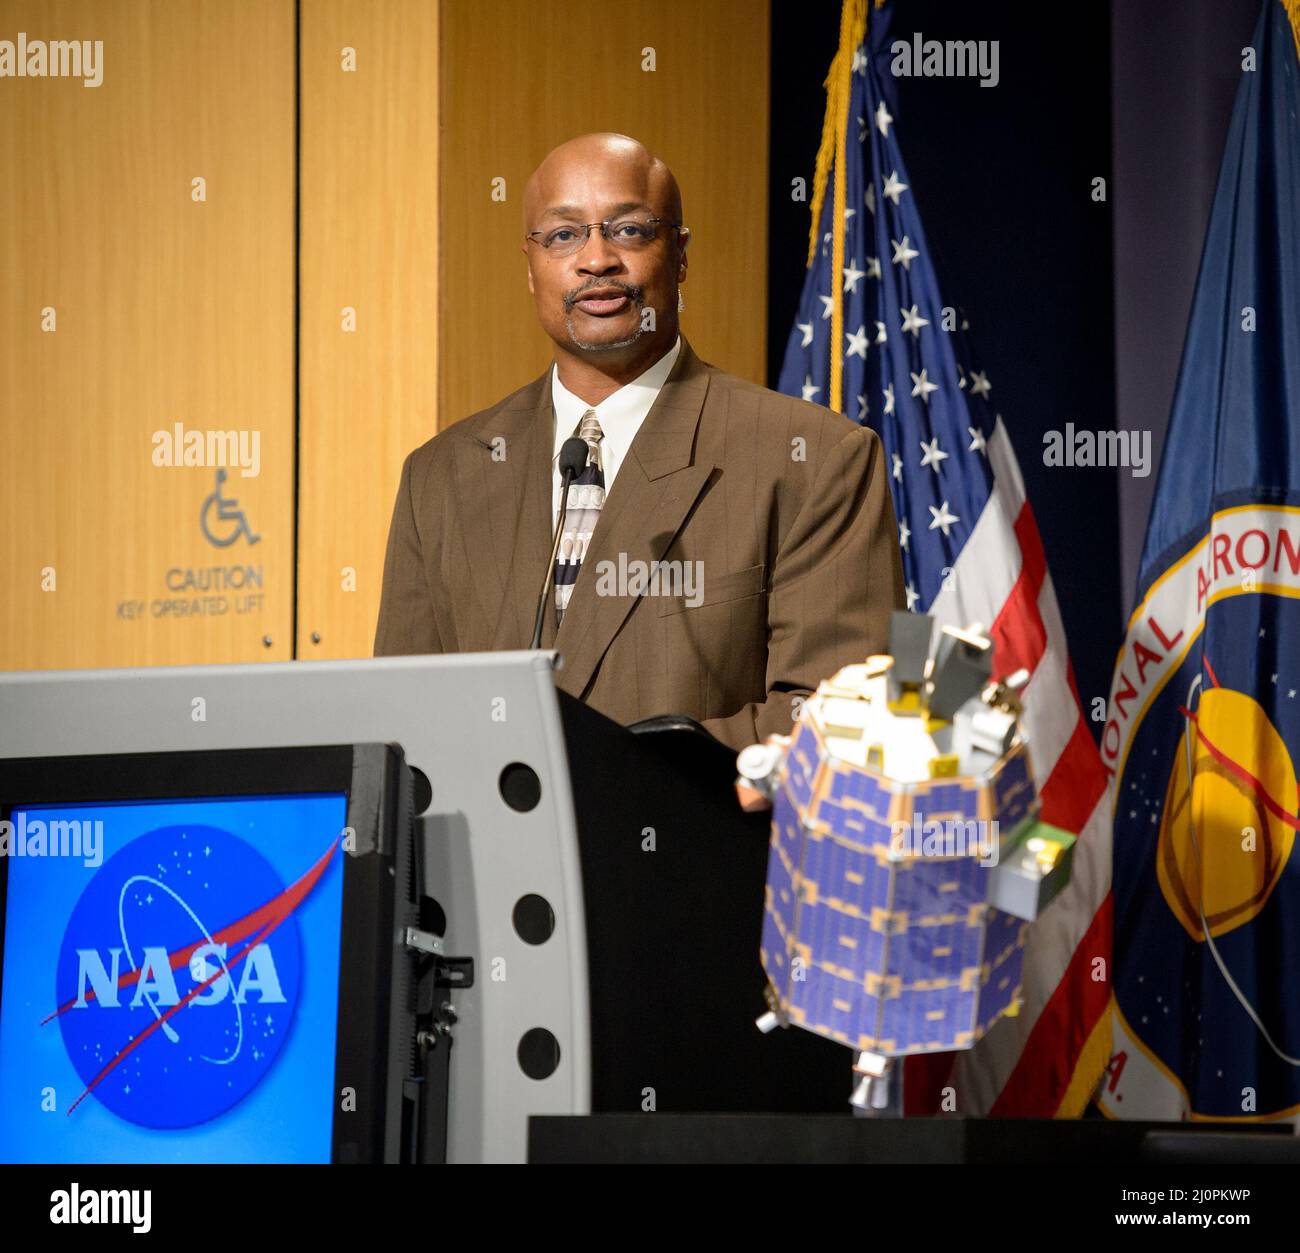 NASA Headquarters Public Affairs Officer Dwayne Brown moderates a Lunar Atmosphere and Dust Environment Explorer (LADEE) mission briefing at NASA Headquarters, Thursday, August 22, 2013 in Washington. Data from NASA's LADEE mission will provide unprecedented information about the environment around the moon and give scientists a better understanding of other planetary bodies in our solar system and beyond. The LADEE mission is scheduled to launch at 11:27 p.m. Friday, Sept. 6, from NASA's Wallops Flight Facility on Wallops Island, Va.  Photo Credit: (NASA/Bill Ingalls) Stock Photo